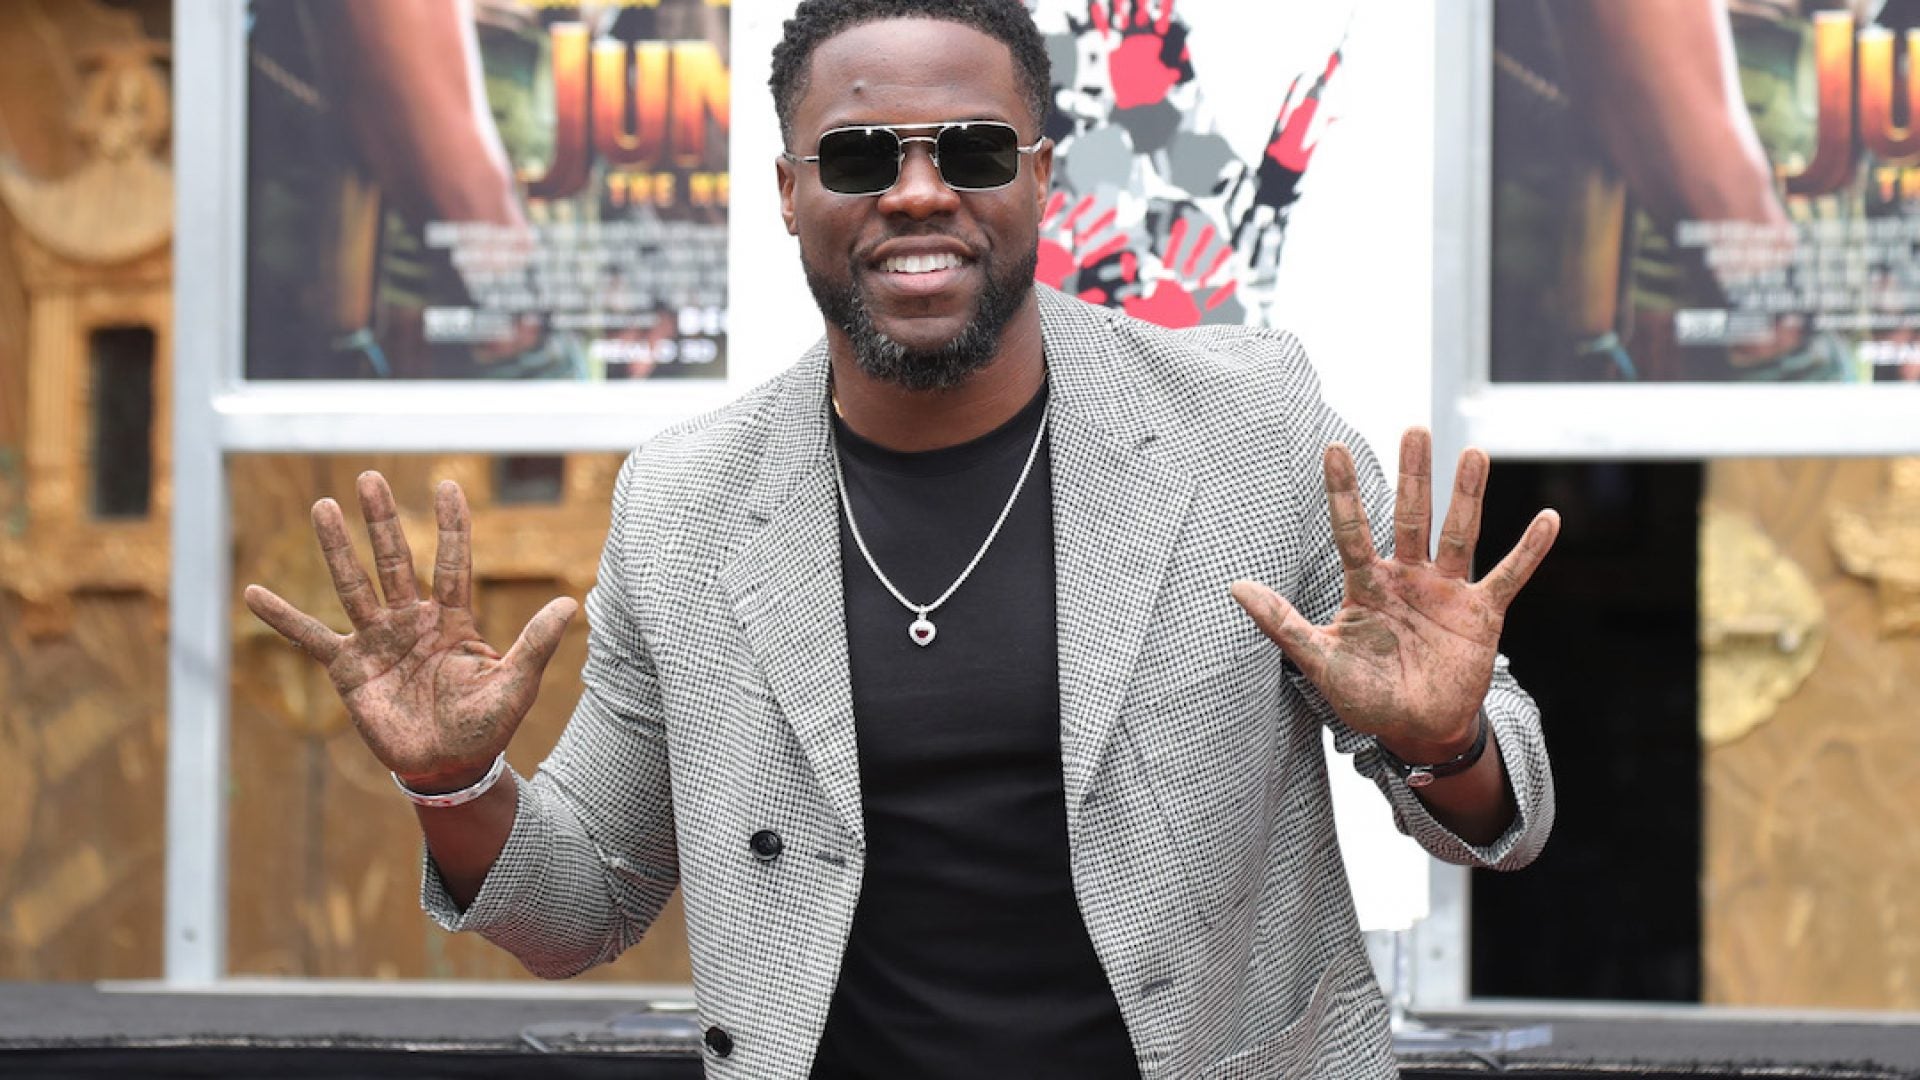 Kevin Hart Receives Foot And Handprint Ceremony At Historic TCL Chinese Theatre